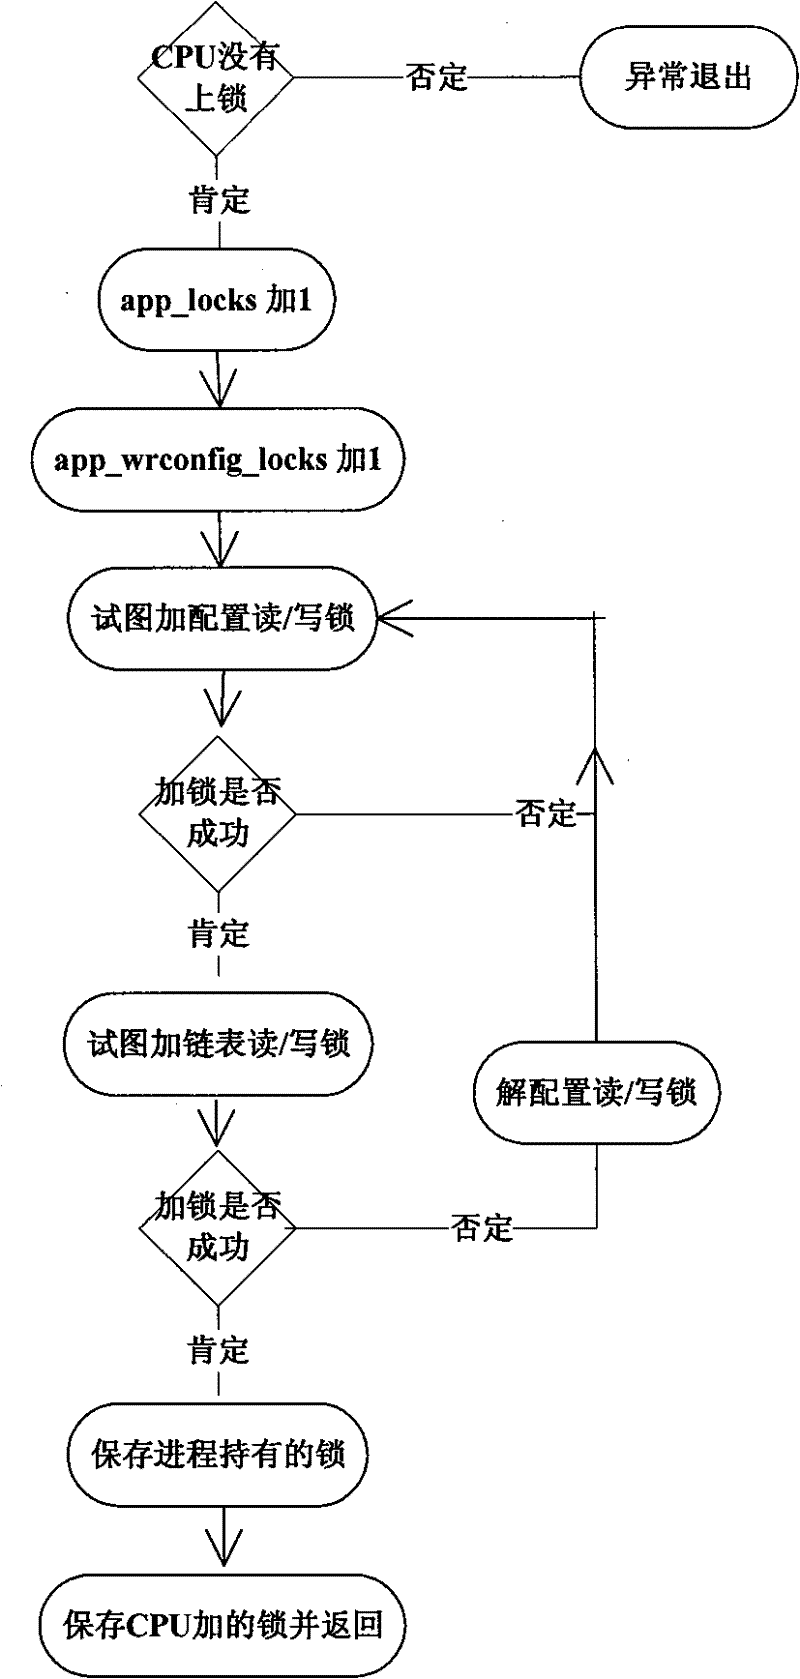 Method for implementing parallel multi-core configuration lock on MIPS platform